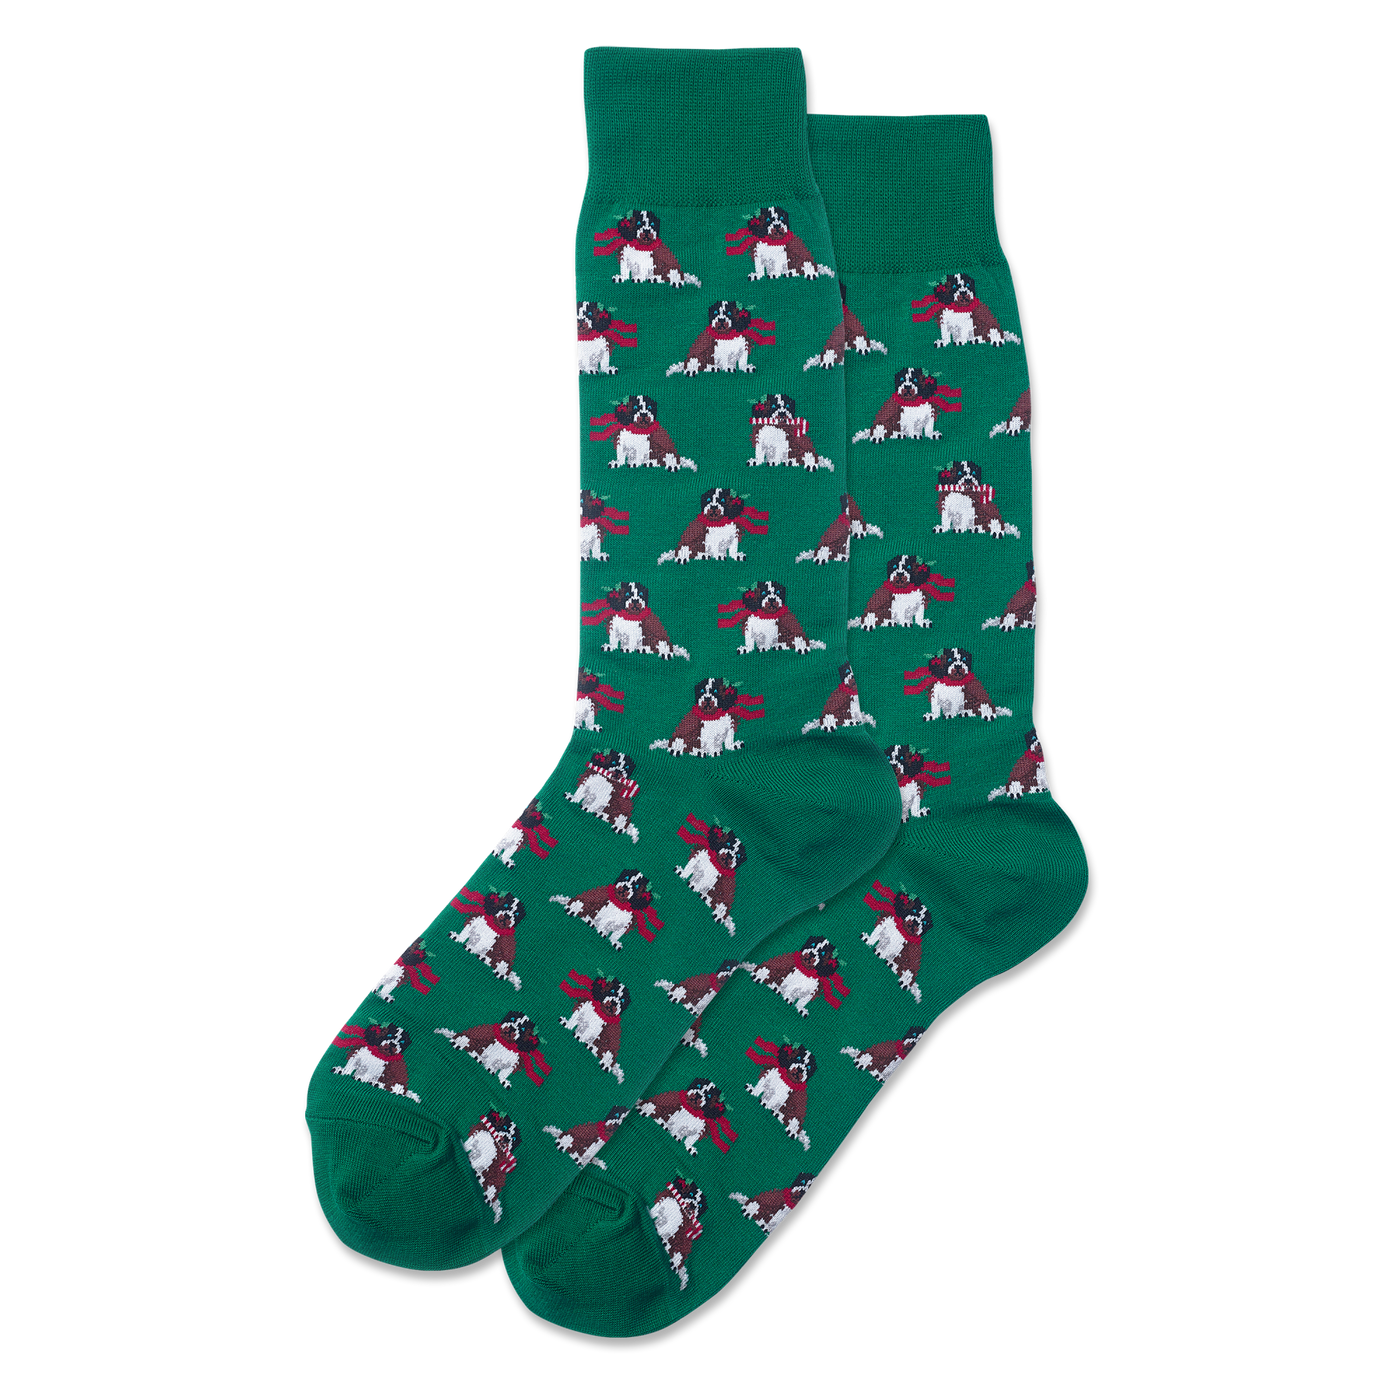 "Holiday Dogs" Cotton Crew Socks by Hot Sox - Large